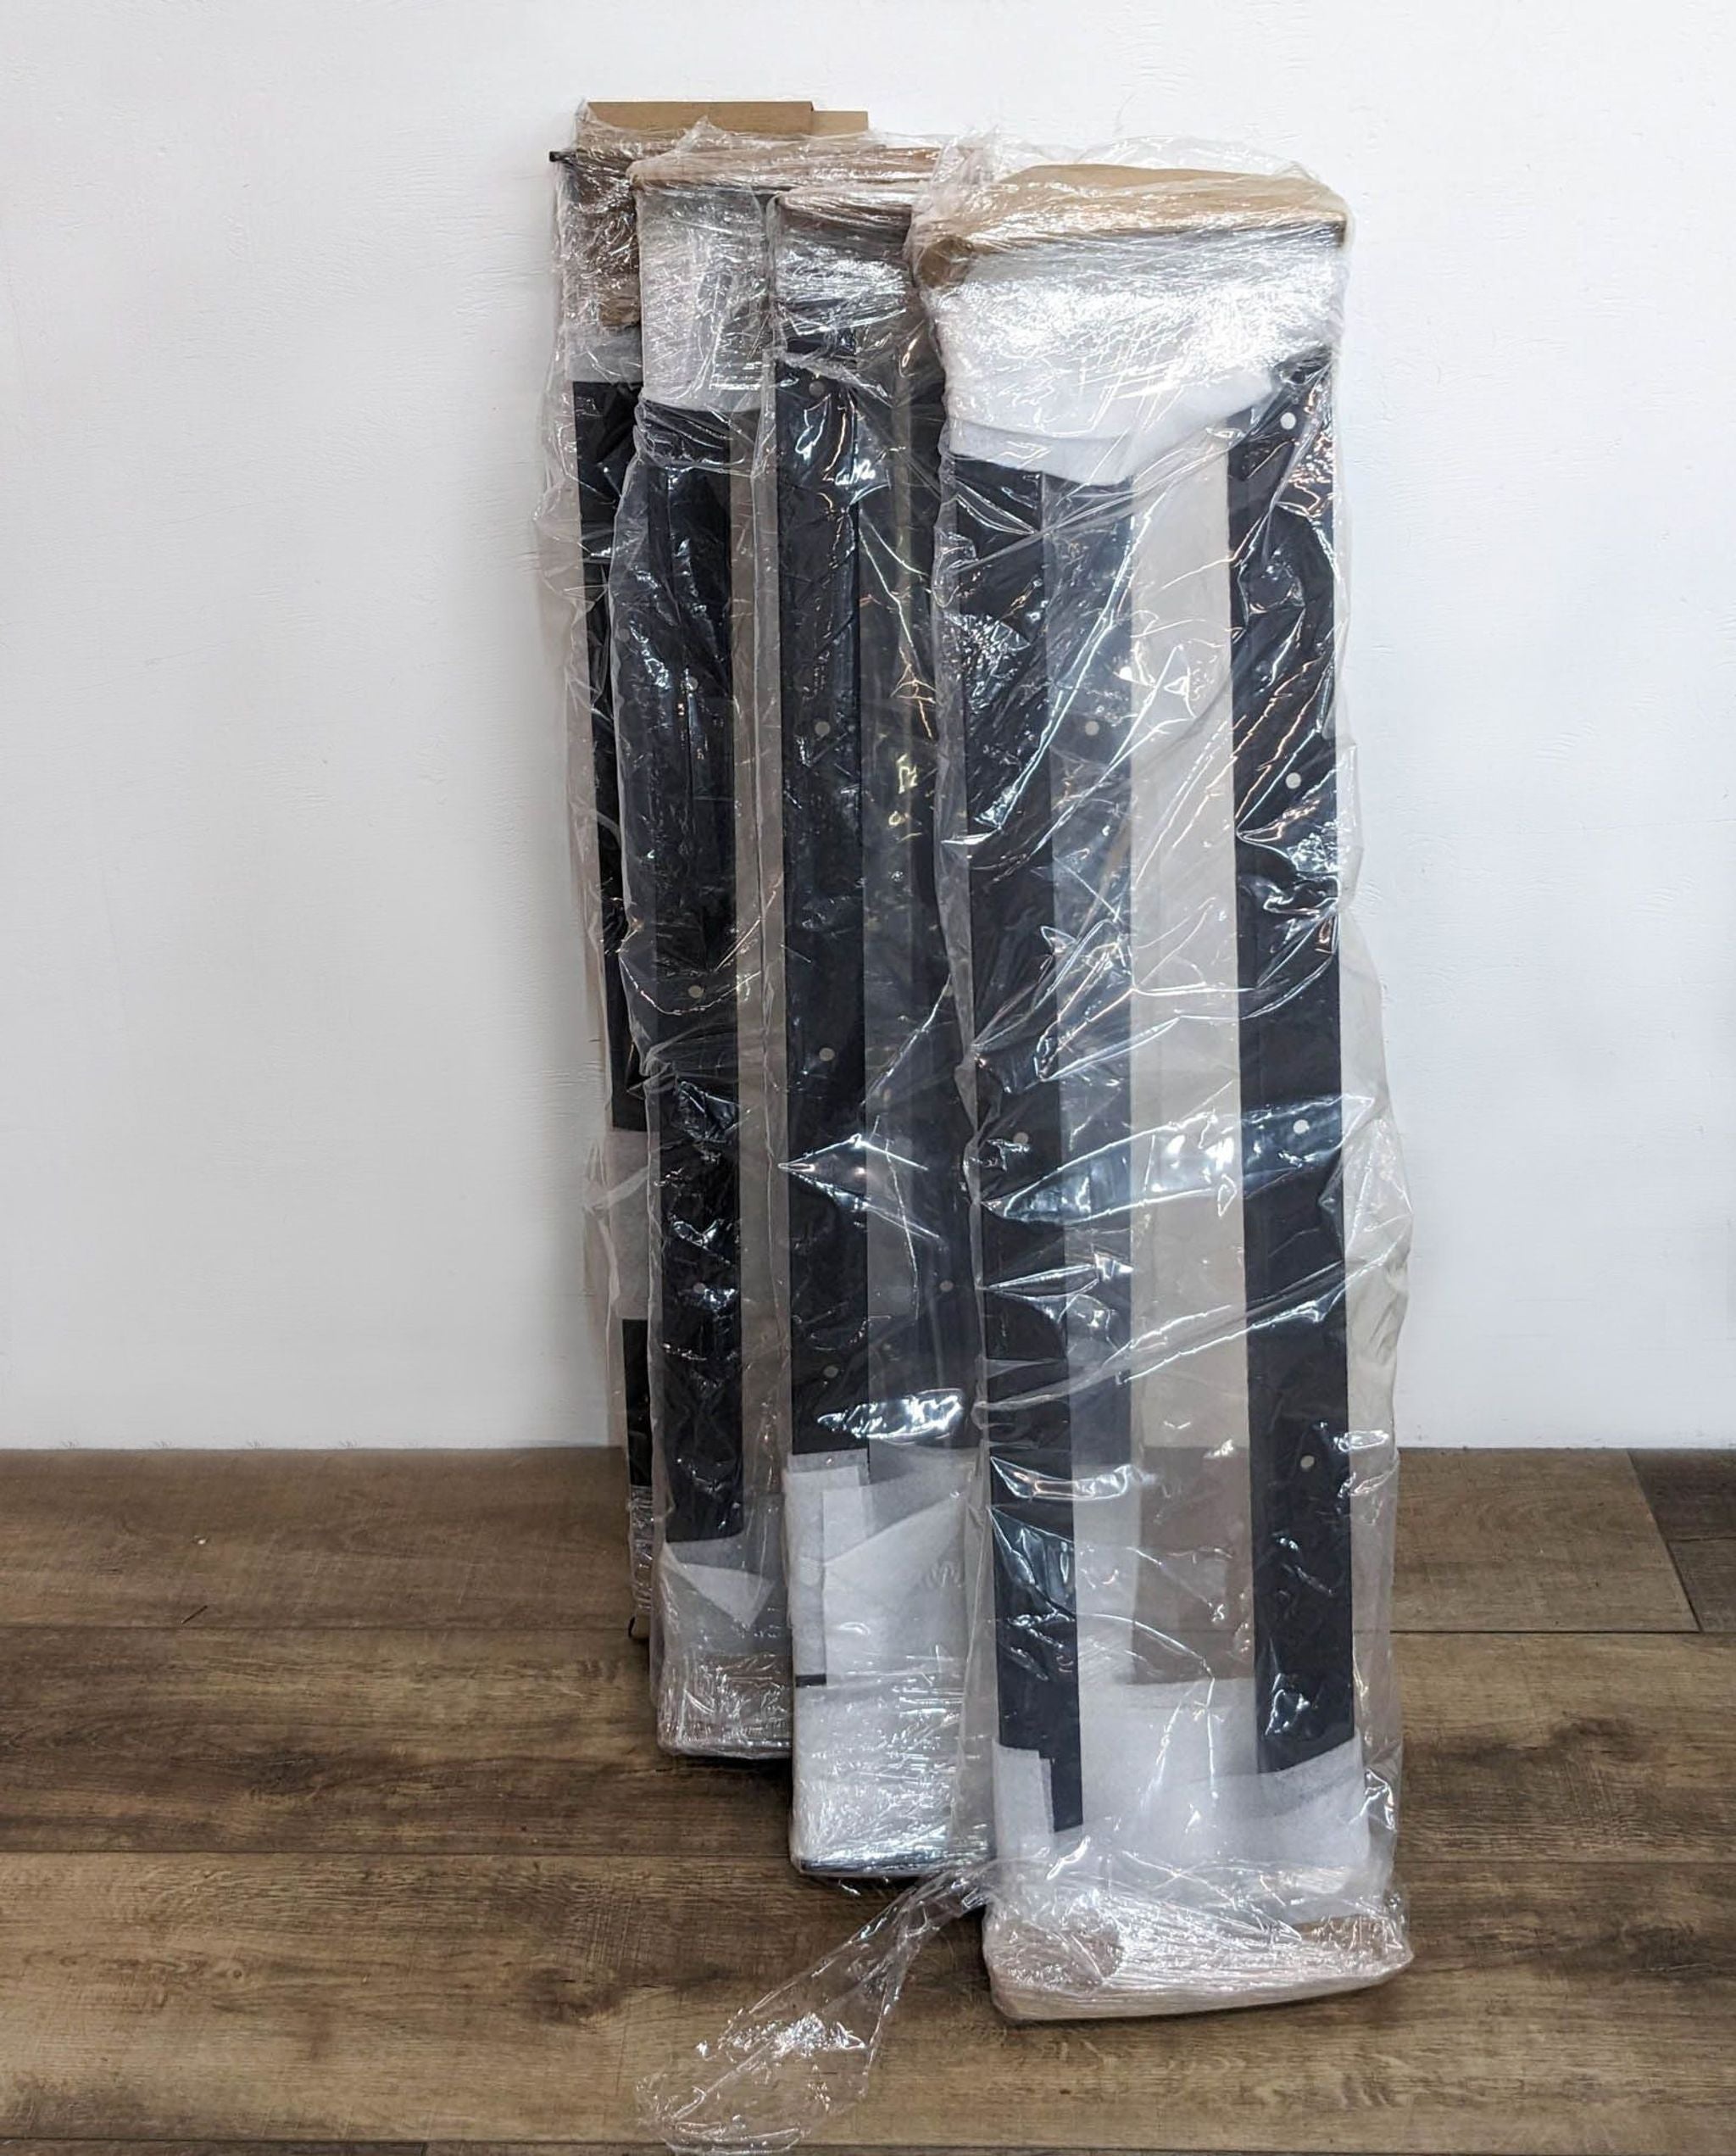 Image 2: Ivanko gym equipment parts wrapped in plastic and foam packaging, ready for assembly or shipment.